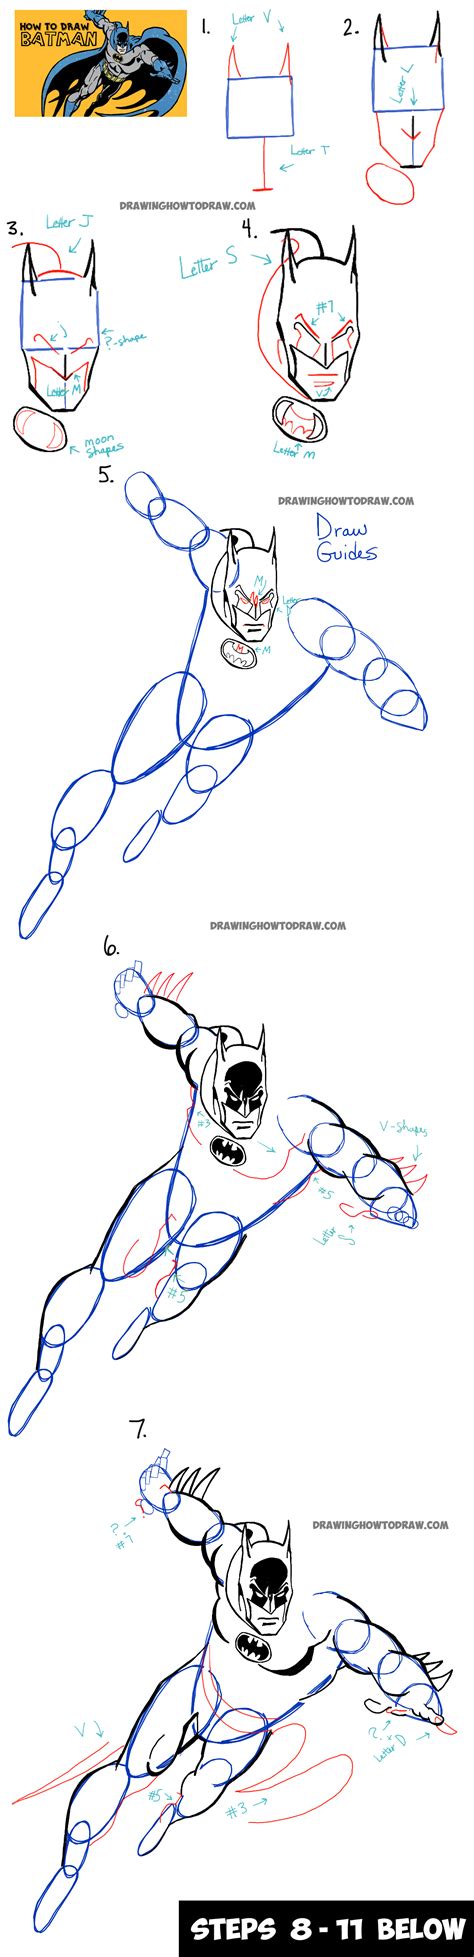 How To Draw Batman In Retro Dc Comics Style Easy Step By Step